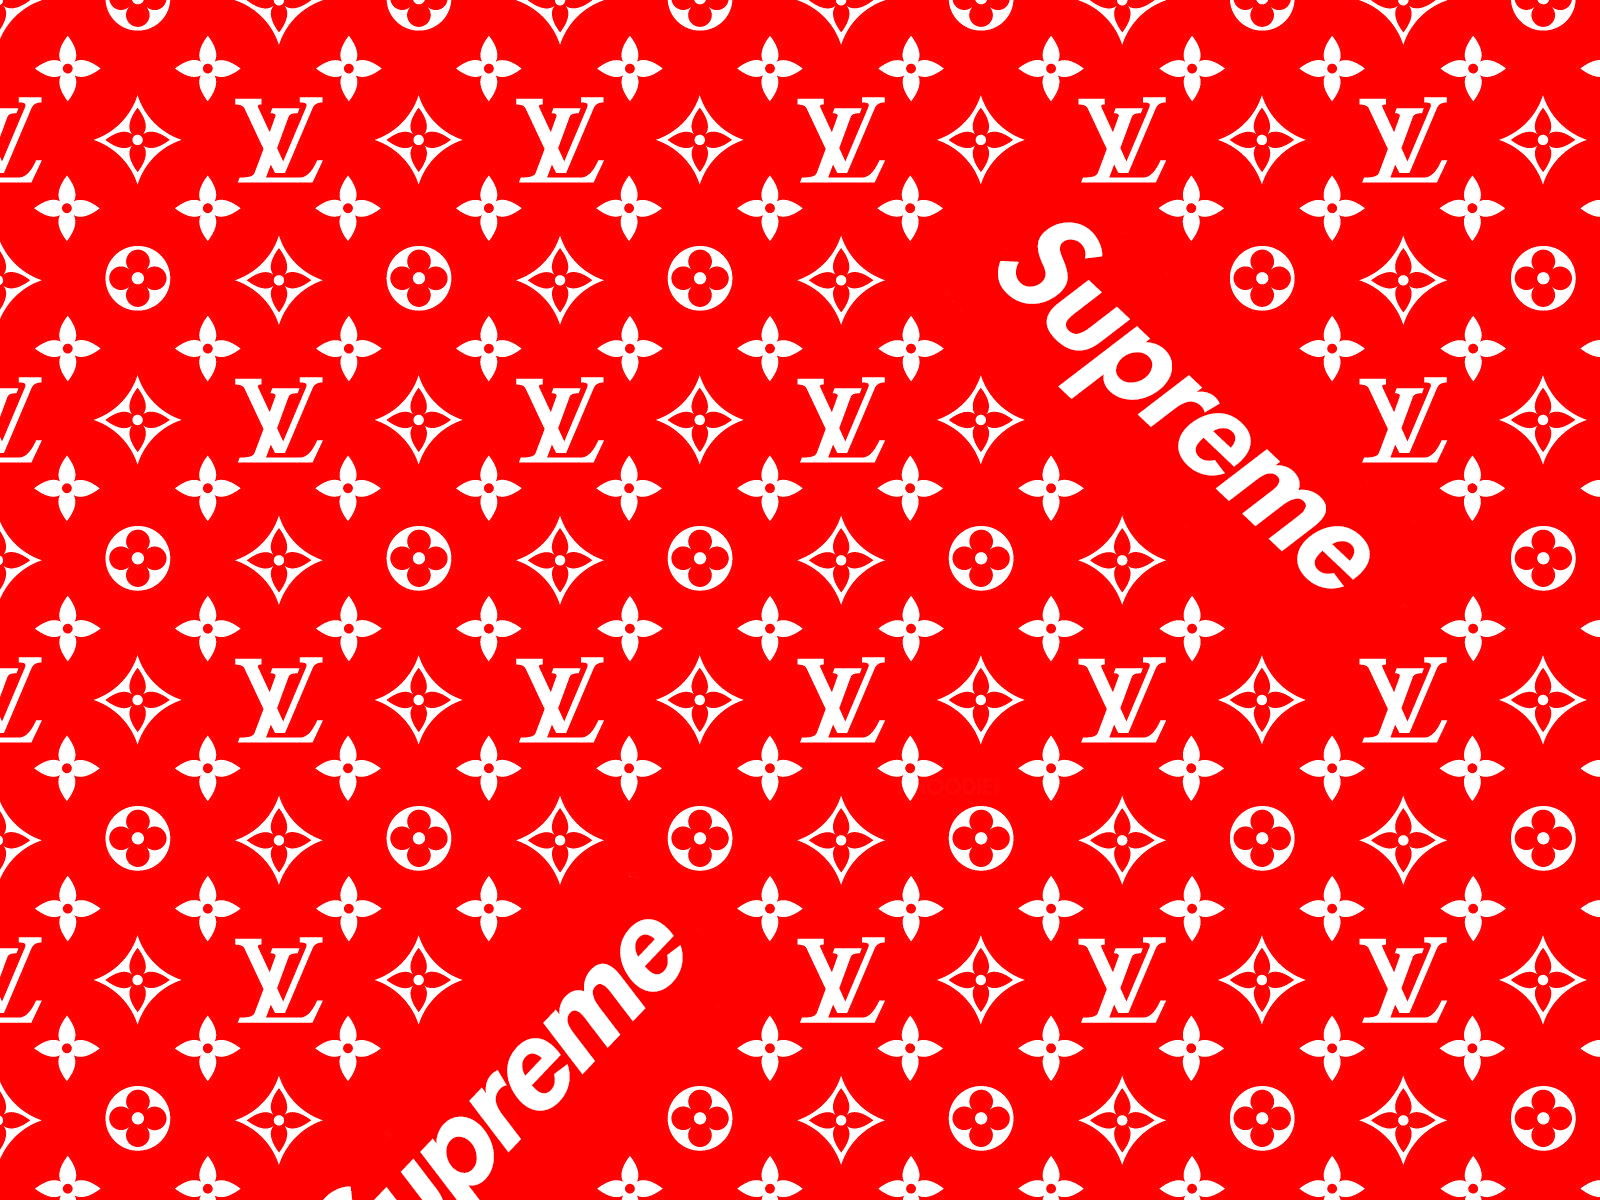 Lv For Android Wallpapers